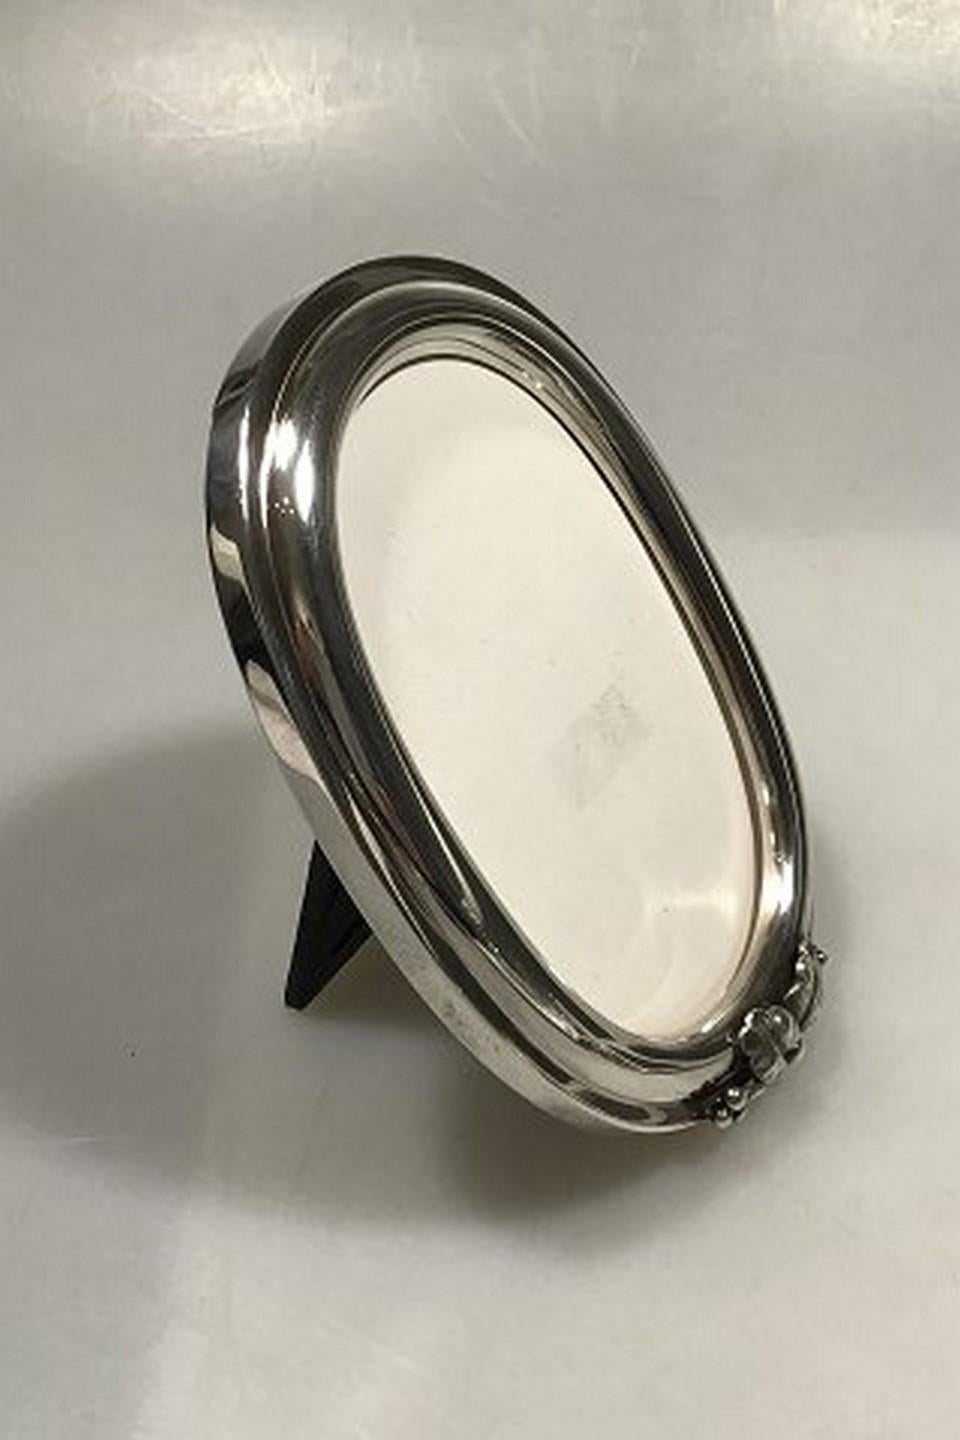 Georg Jensen sterling silver picture frame no 425. Measures 15.5 cm x 11.5 cm(6 7/64 in x 4 17/32 in) Weight 150 gr Incl stand (No glass)
Item no.: 434572.